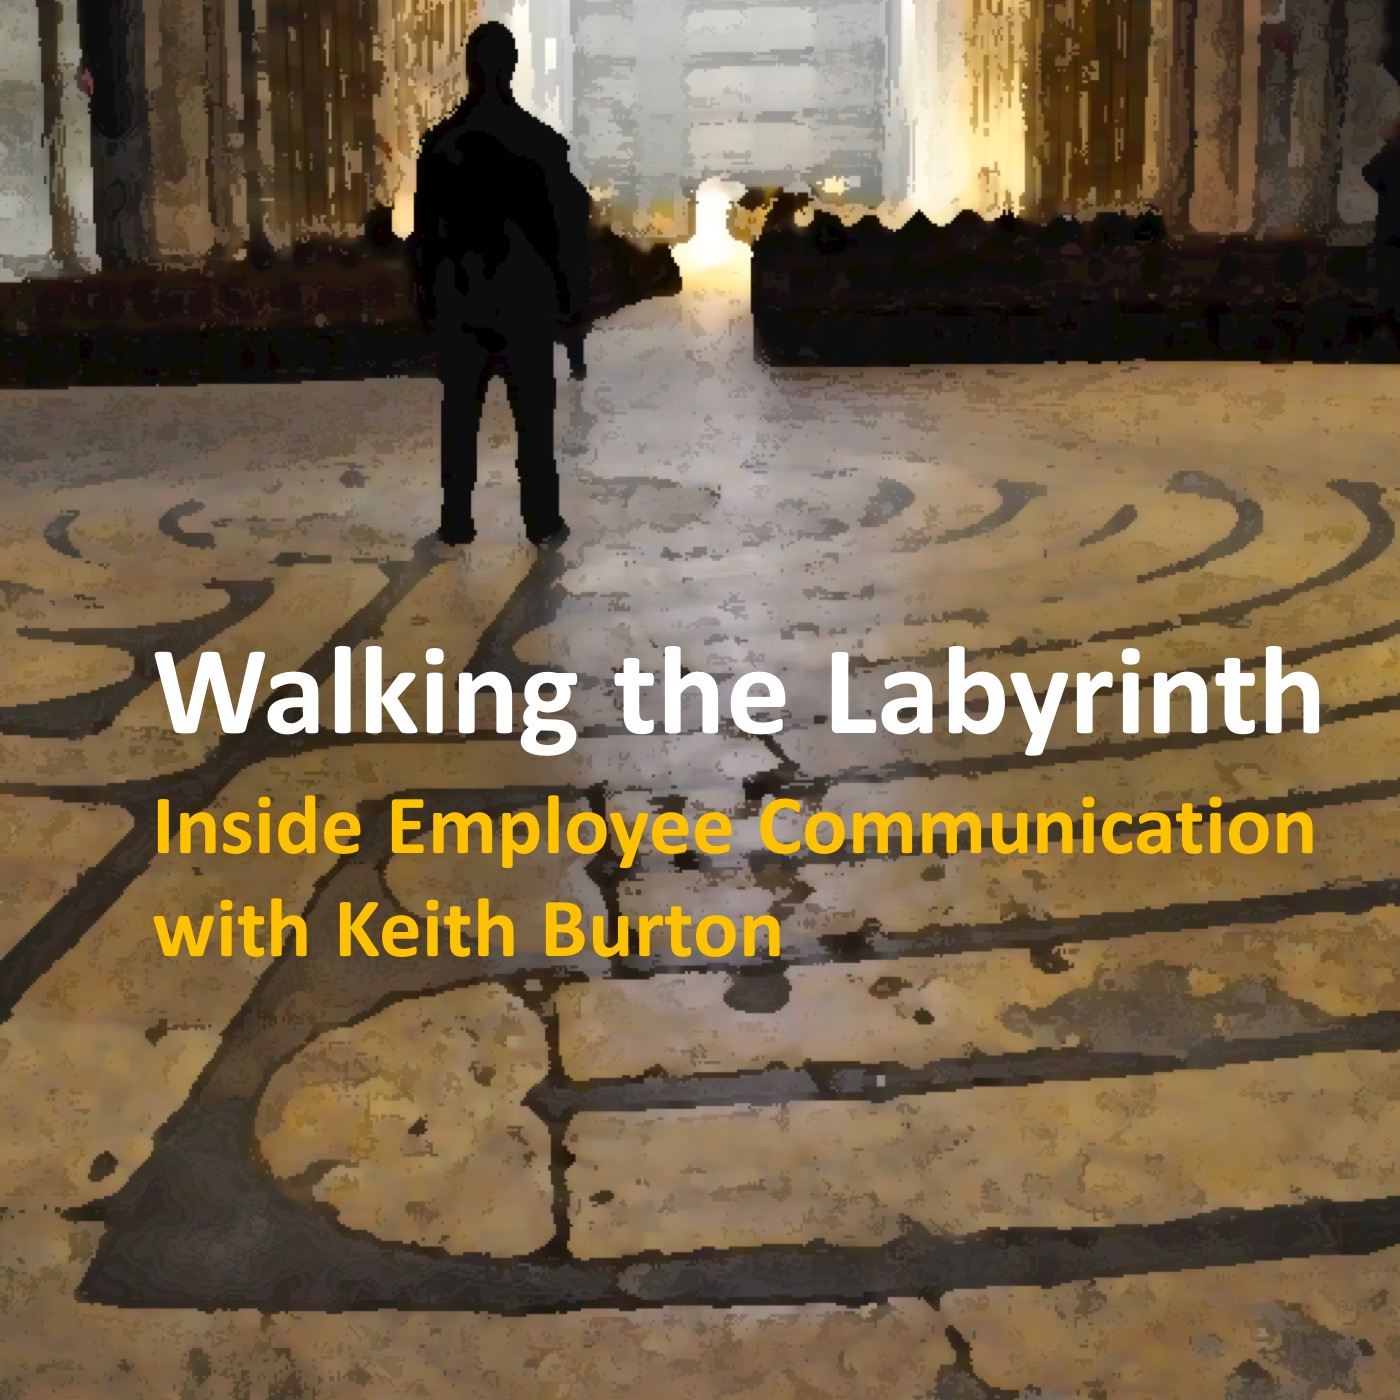 Walking the Labyrinth: Inside Employee Communications with Keith Burton